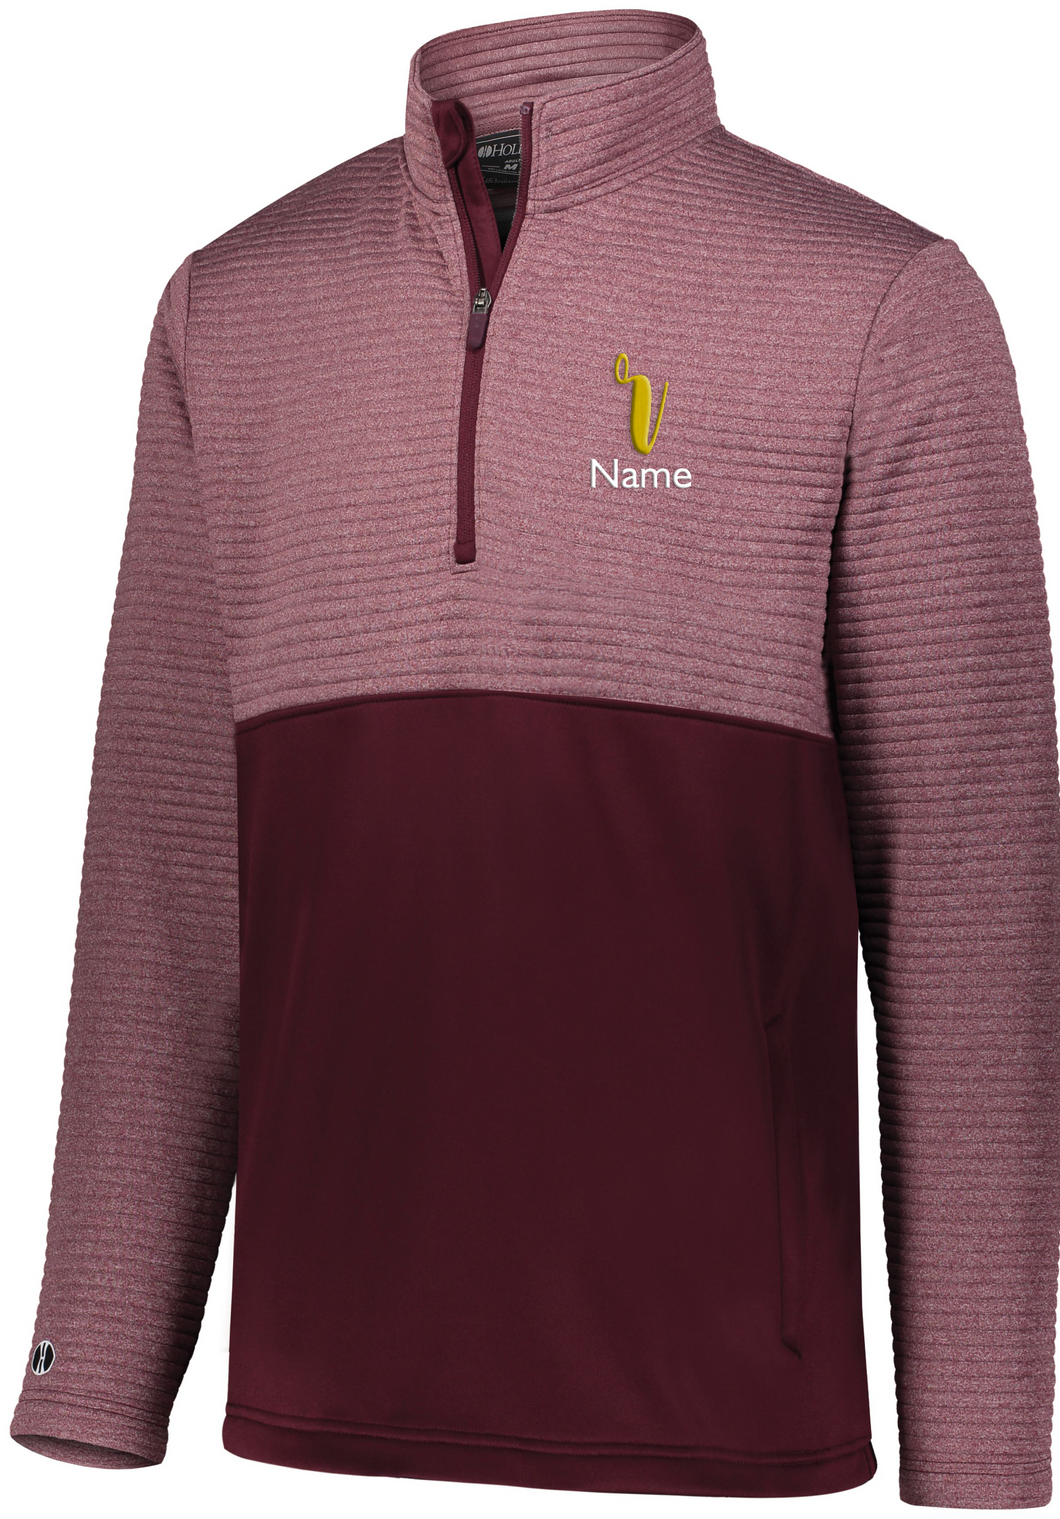 Rouse Parent Regulate Pullover Maroon/Heather